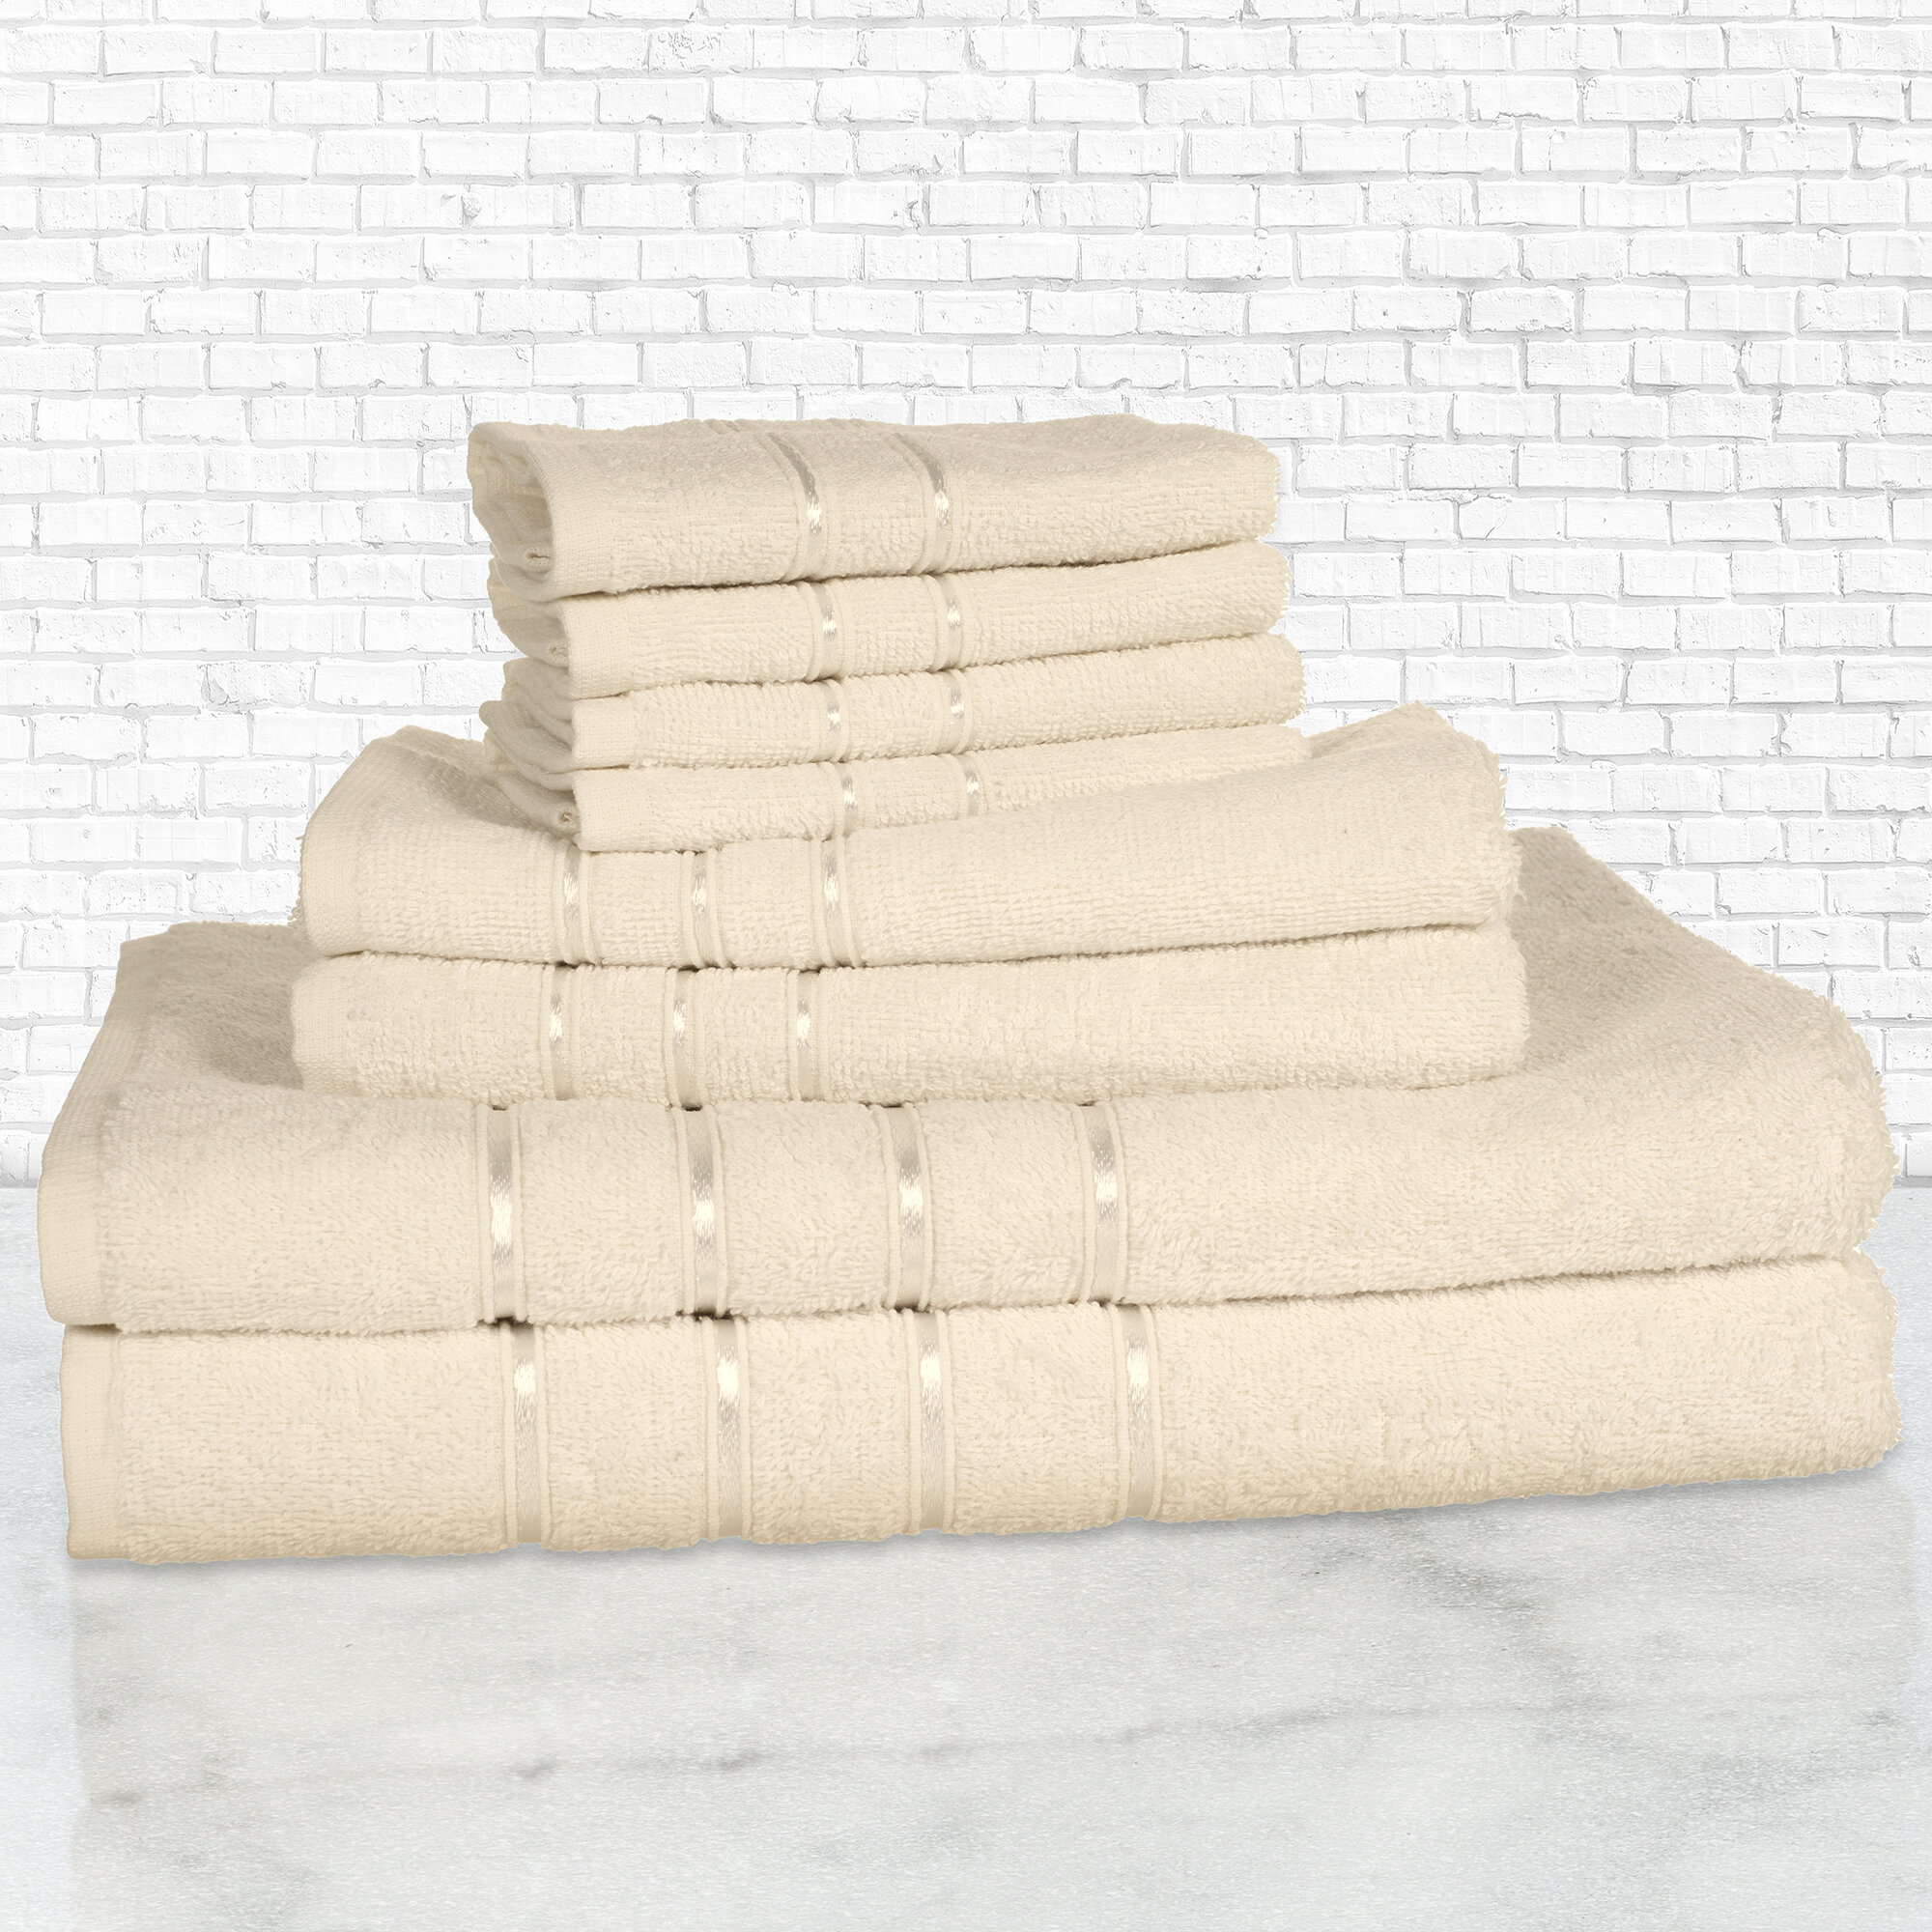 6 Piece 100% Cotton Towel Set Plymouth Home Taupe 27.5 W